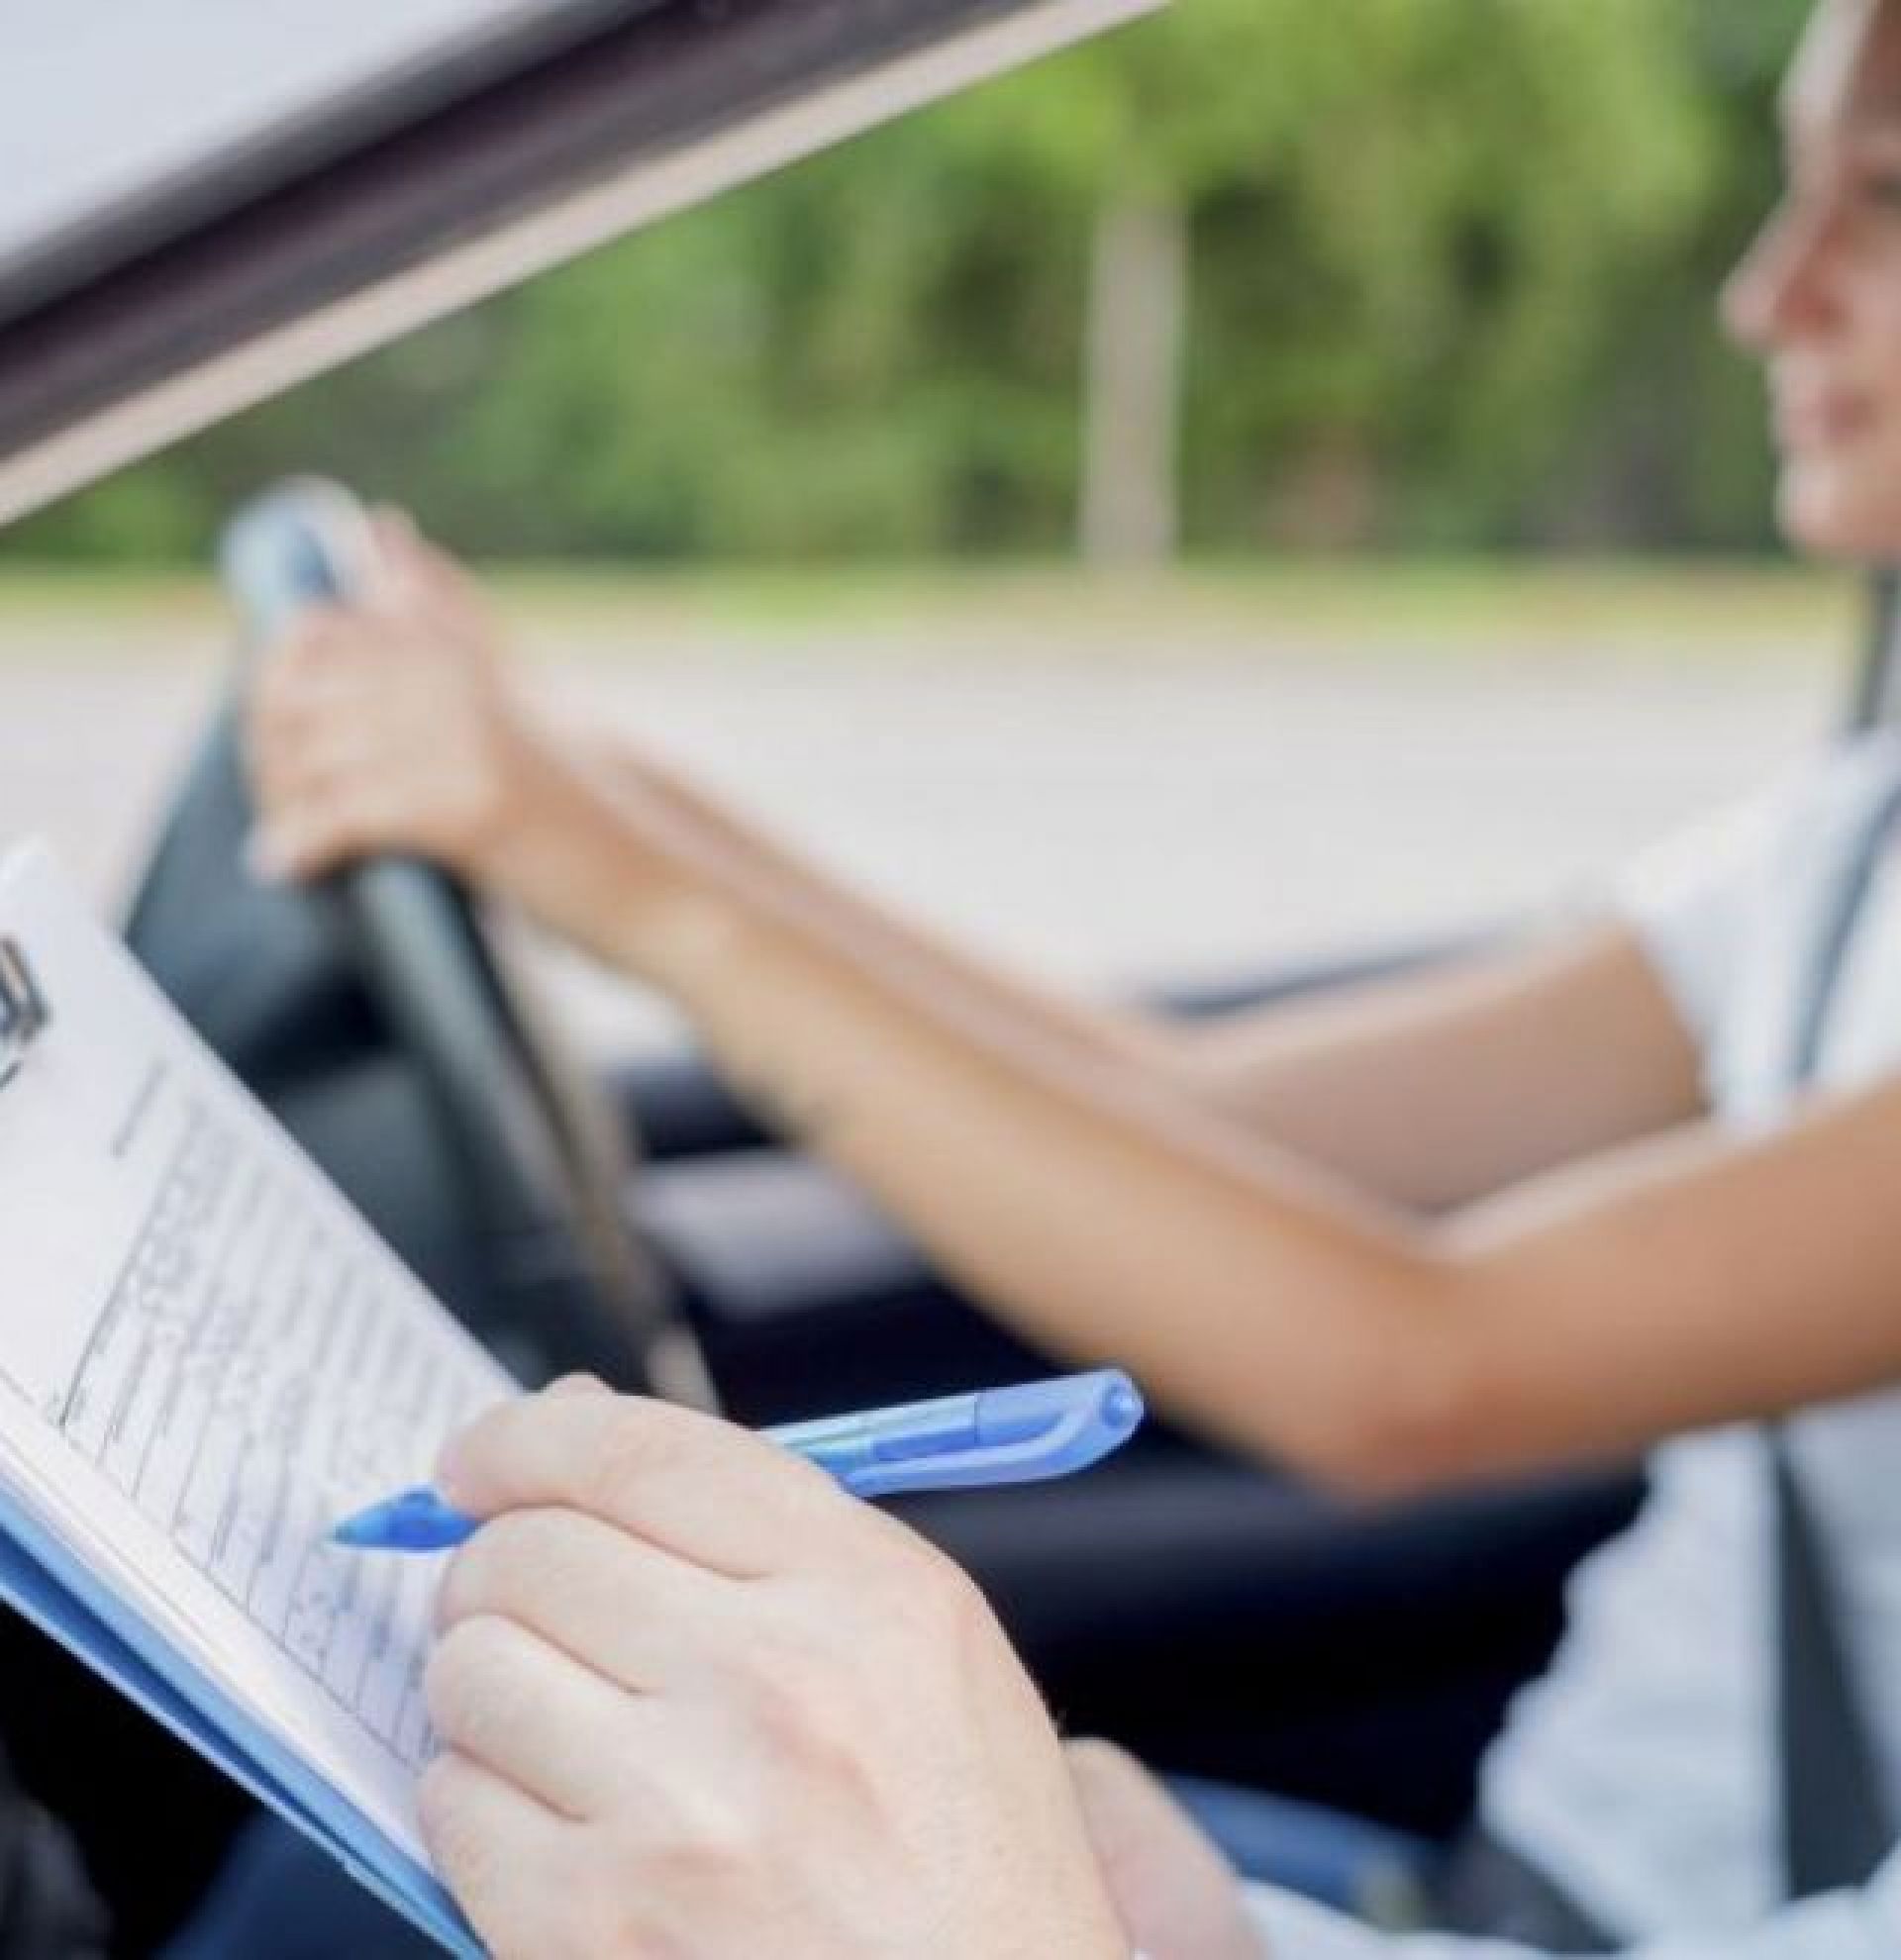 Car Lessons & Driving Instructor Training